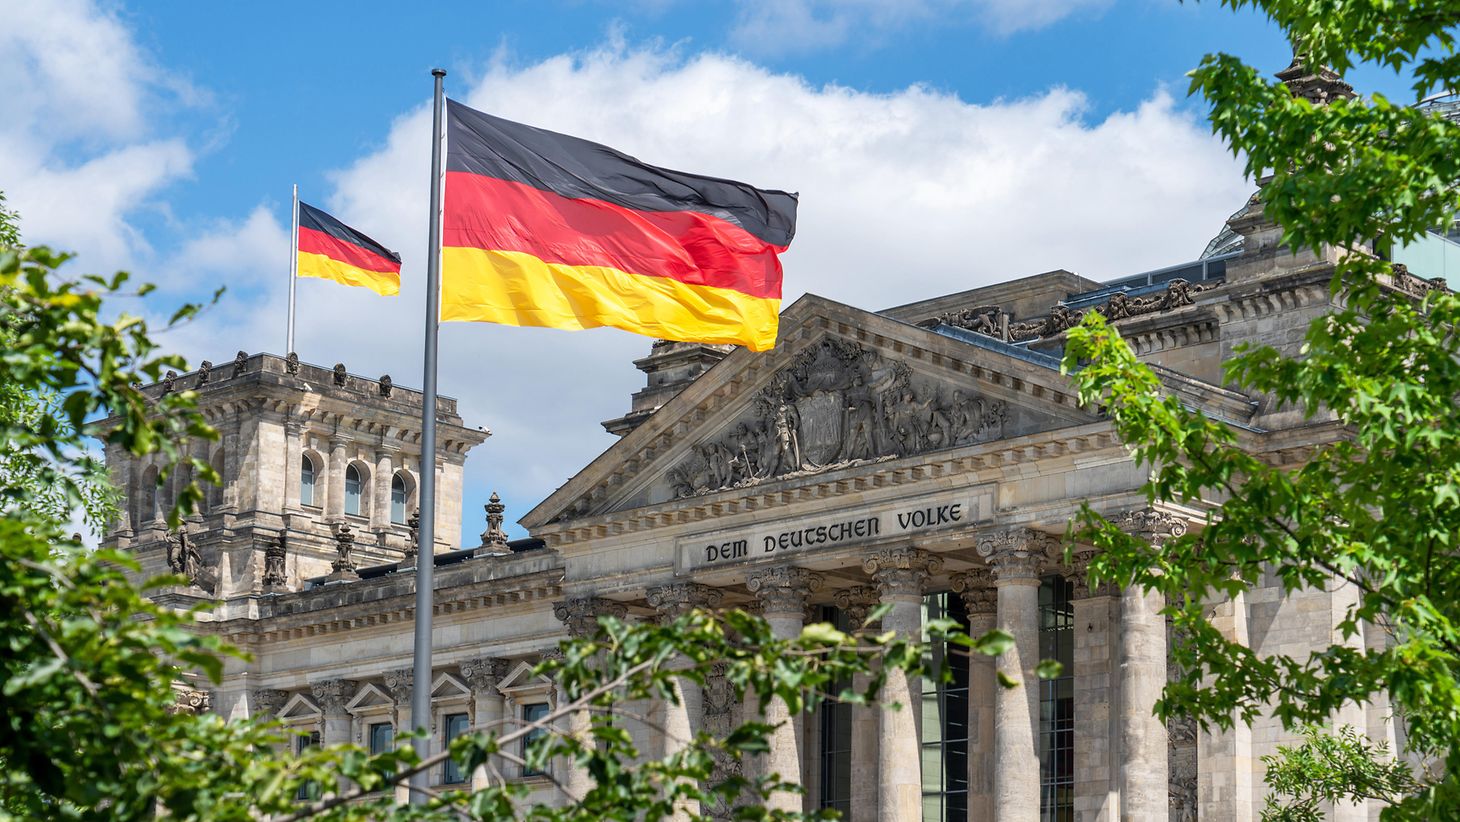 Will Germany re-adopt it's original black-white-red tri-color flag